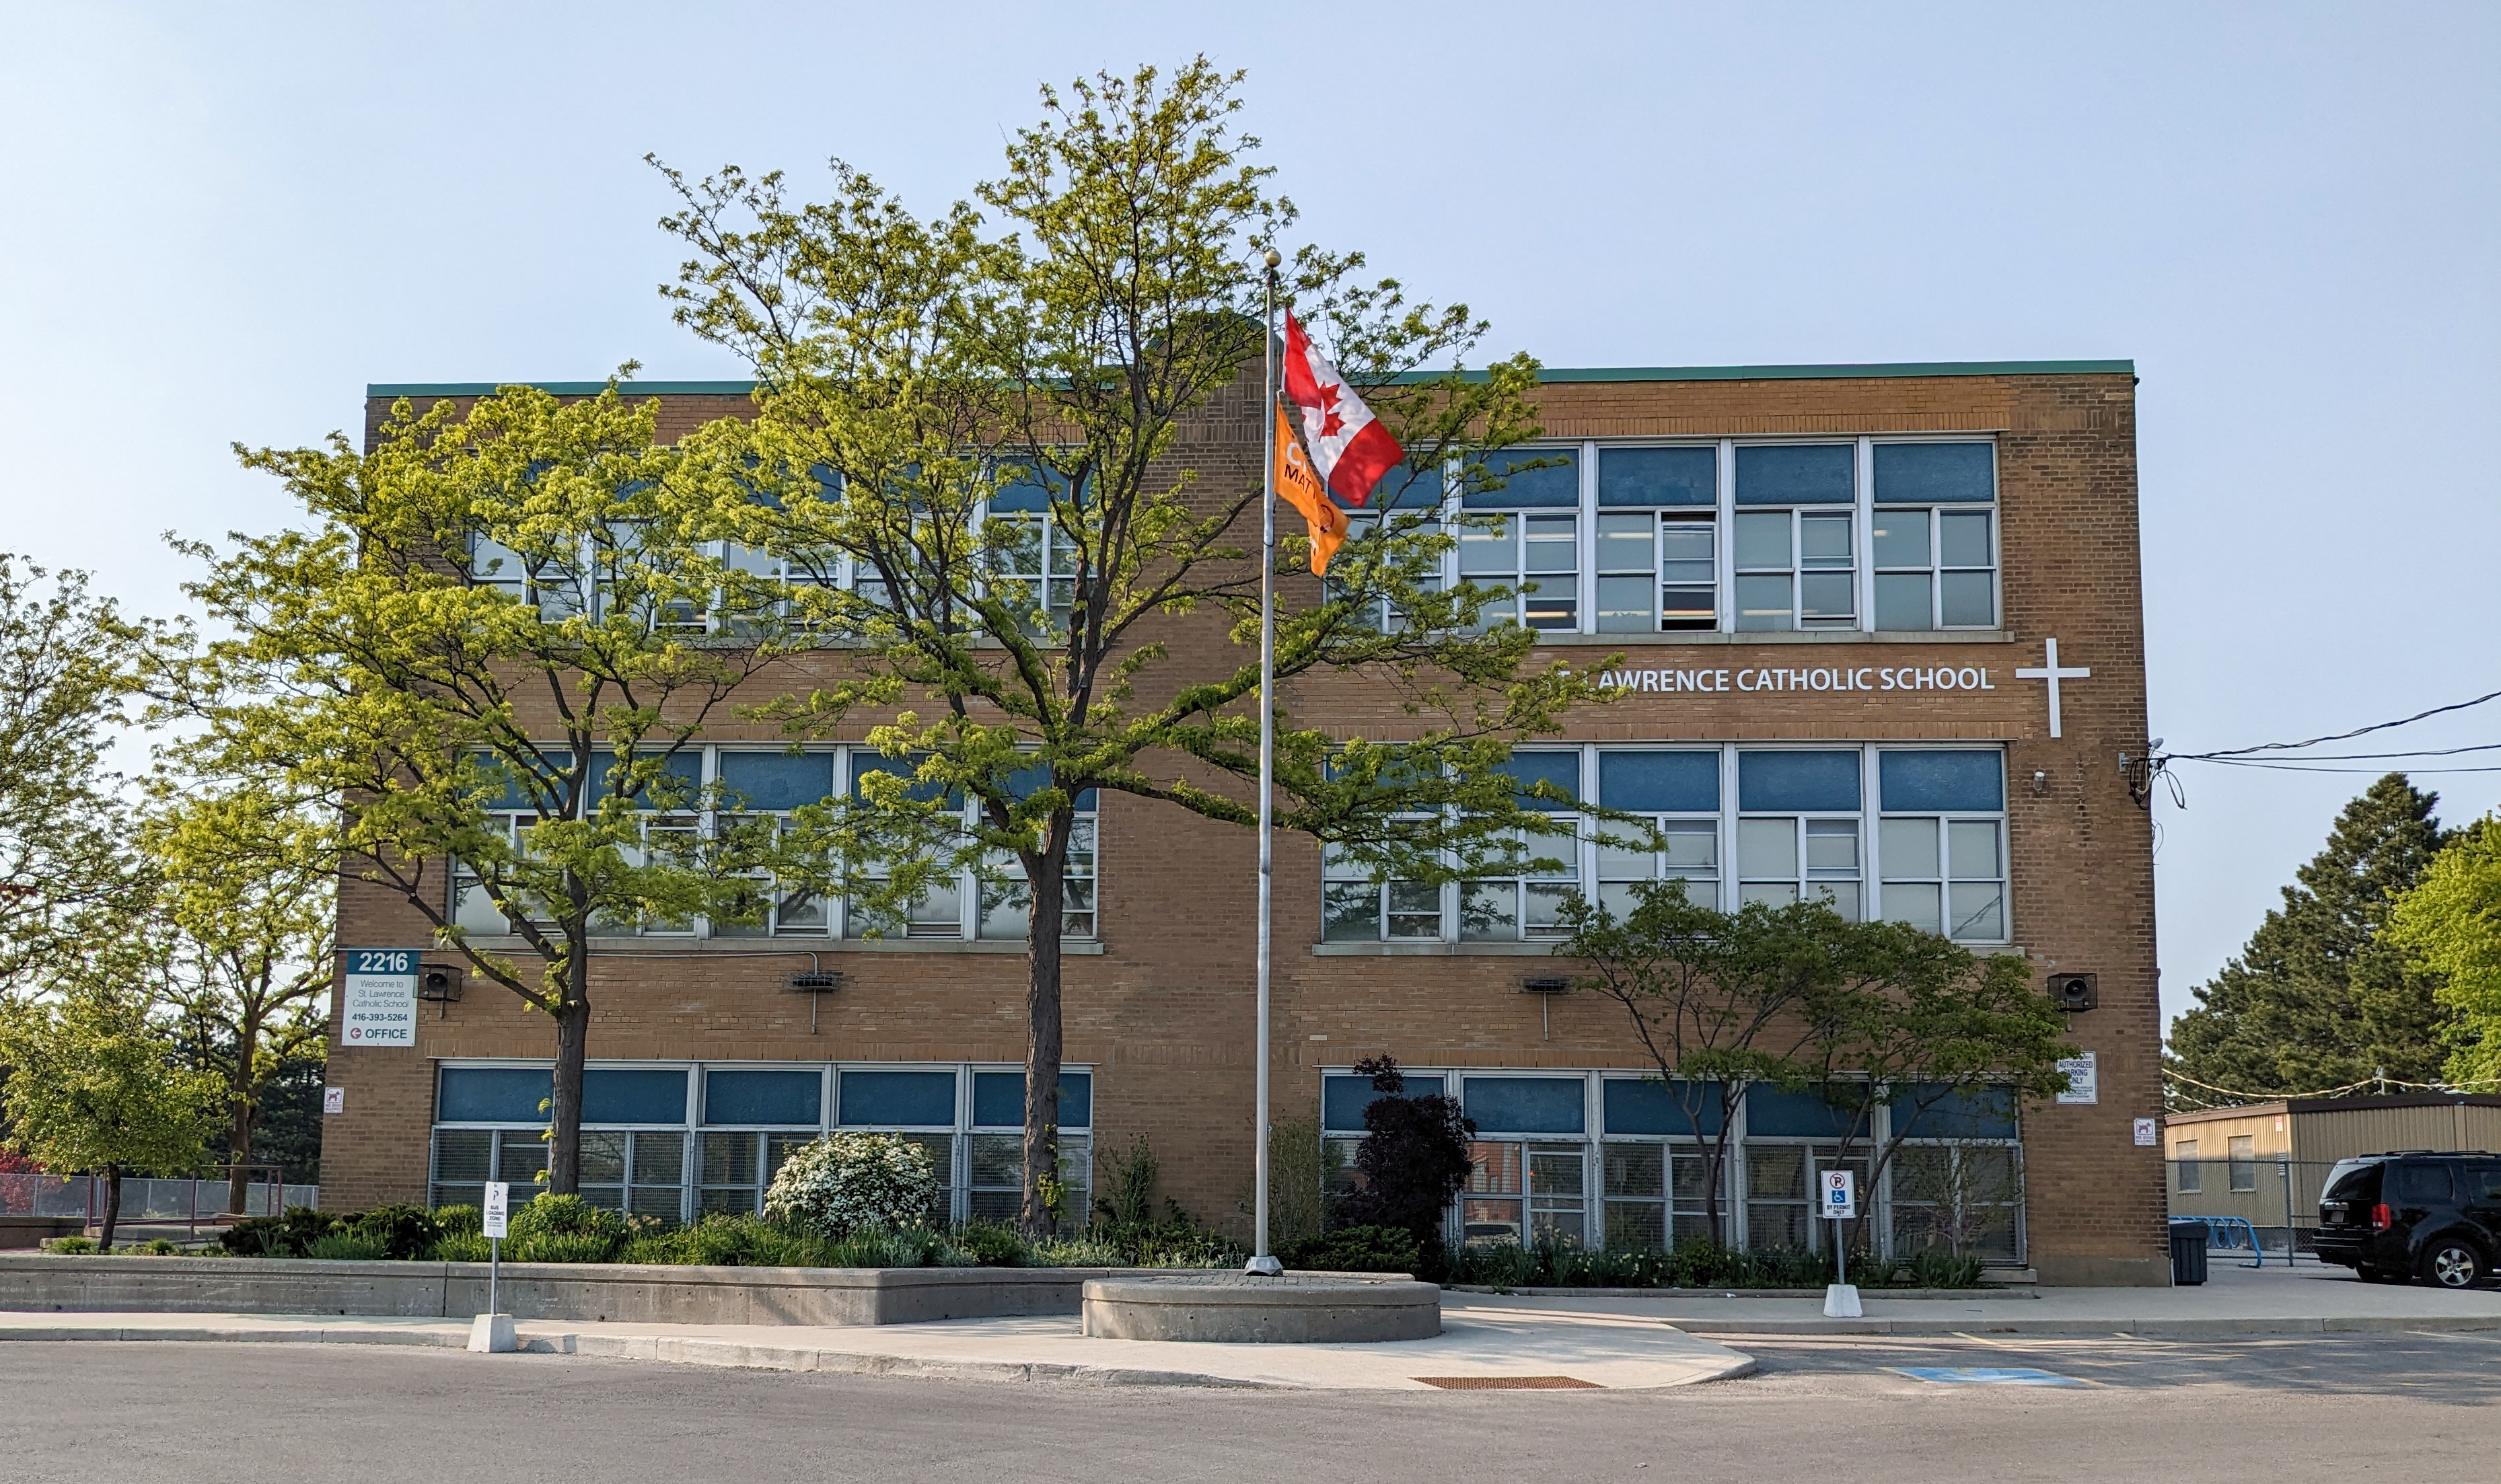 The front of the St. Lawrence Catholic School building.